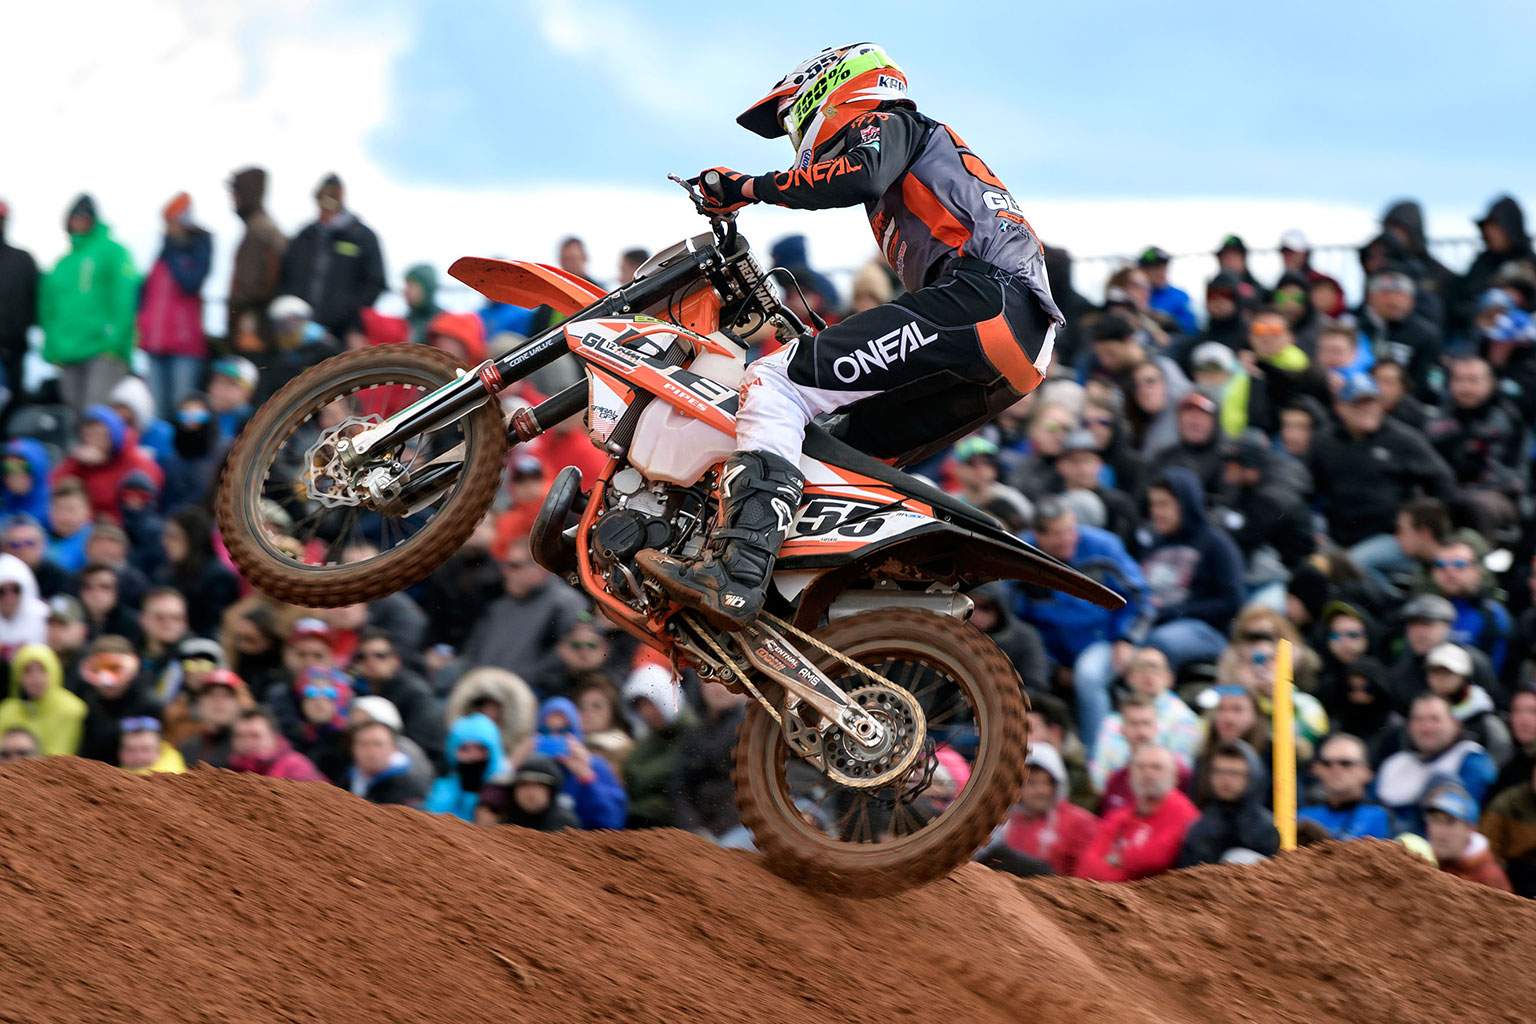 Kras took the win in EMX300